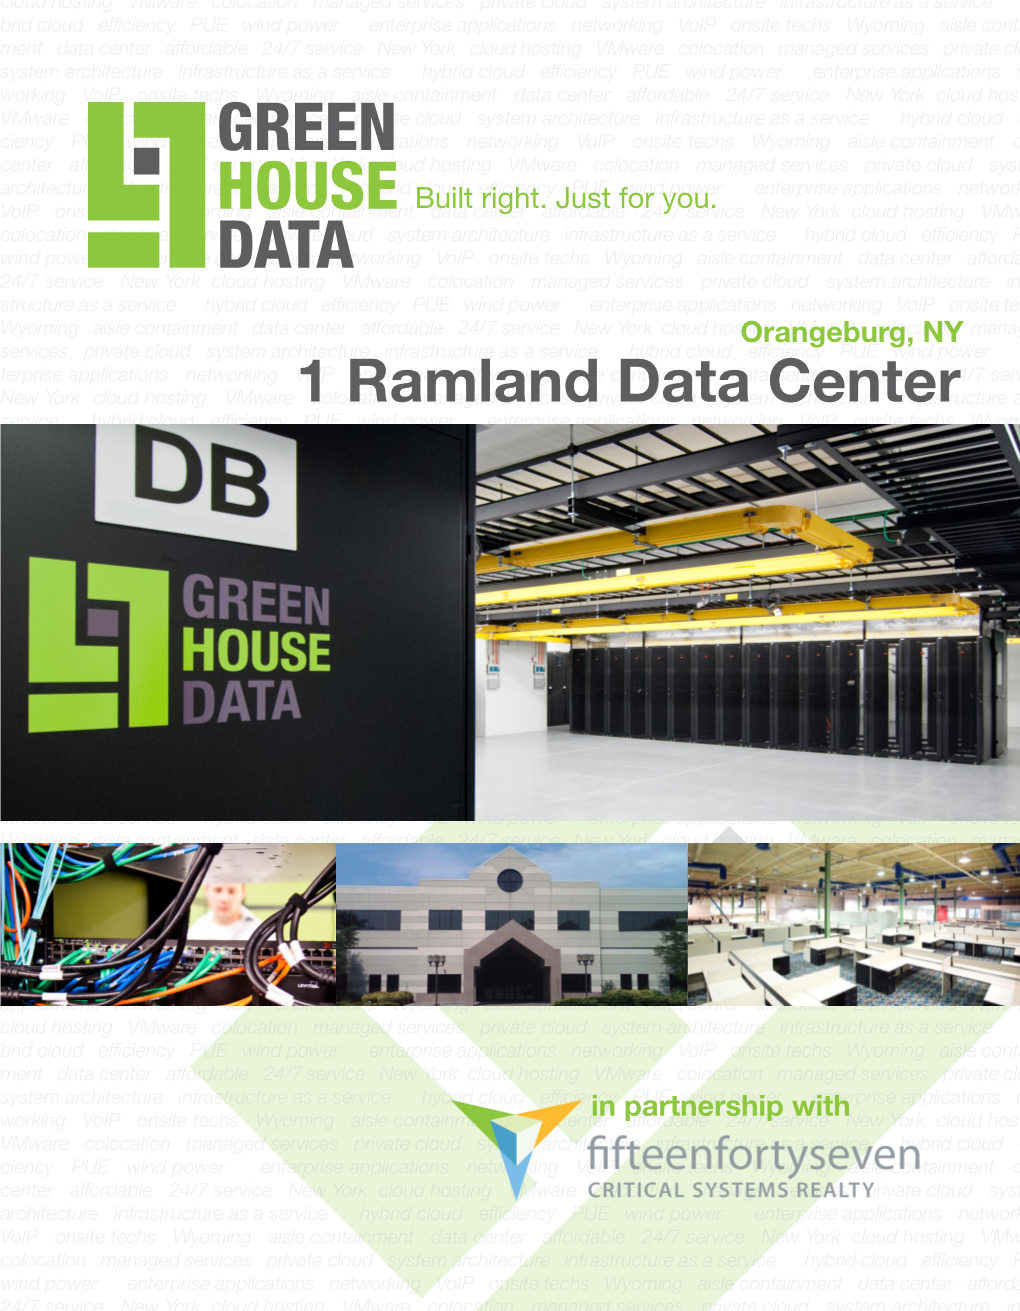 Green House Data Brings Efficient, Reliable Infrastructure to the New York Market